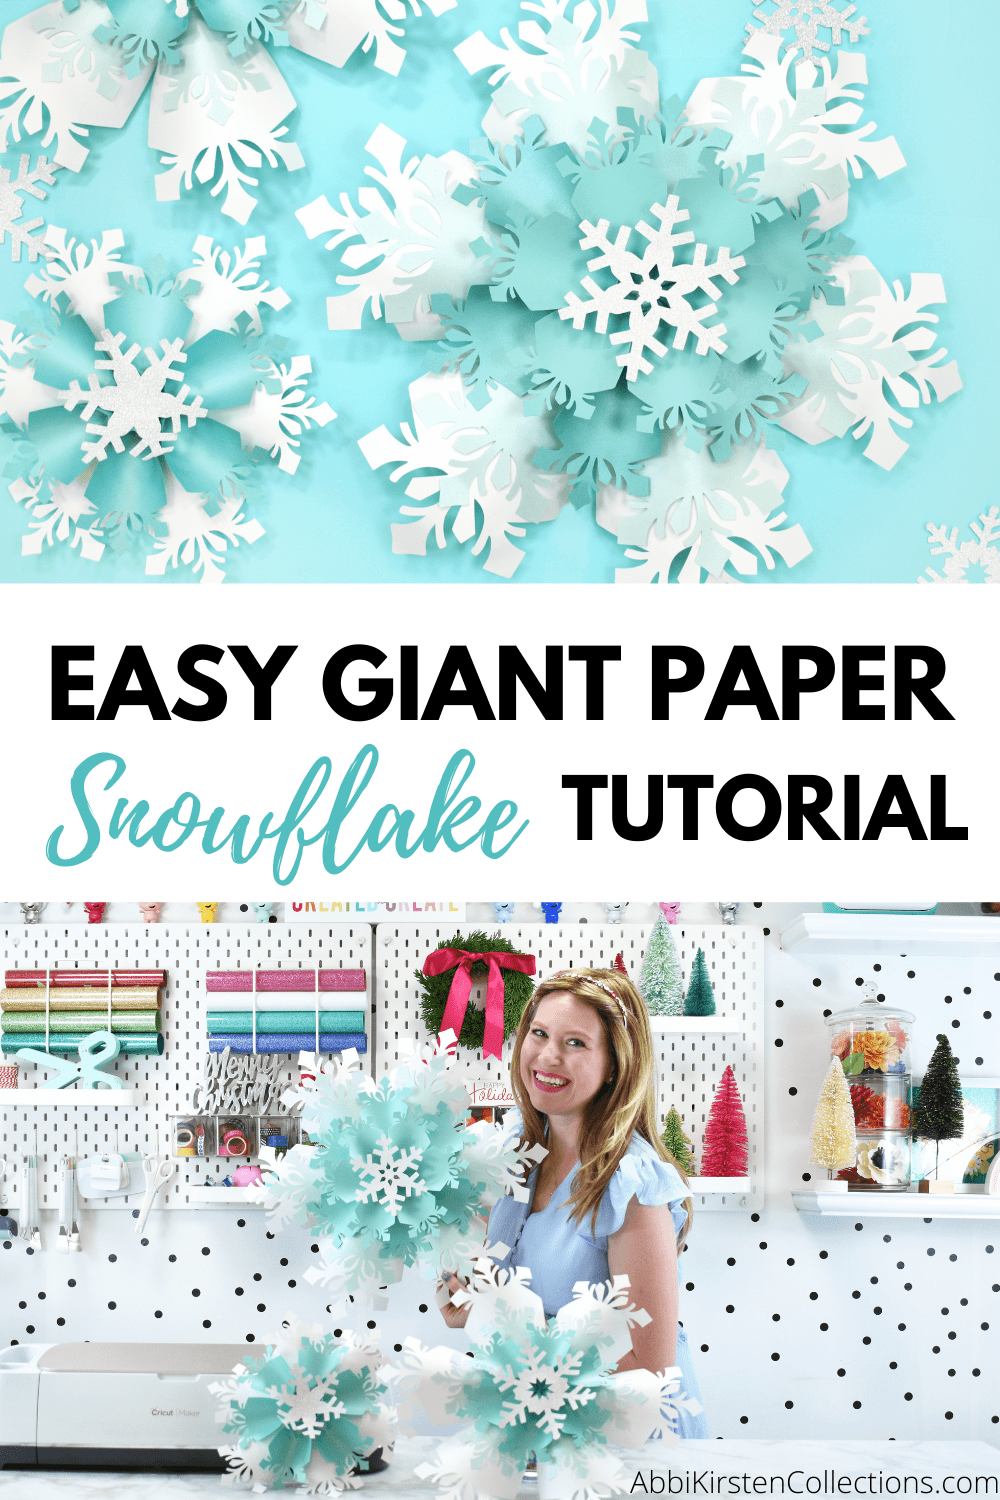 Two stacked images with text in between. The top image shows giant paper snowflakes on a light blue background. The bottom image shows Abbi in her craft room holding three giant paper snowflakes. Image text says "Easy giant paper snowflake tutorial"